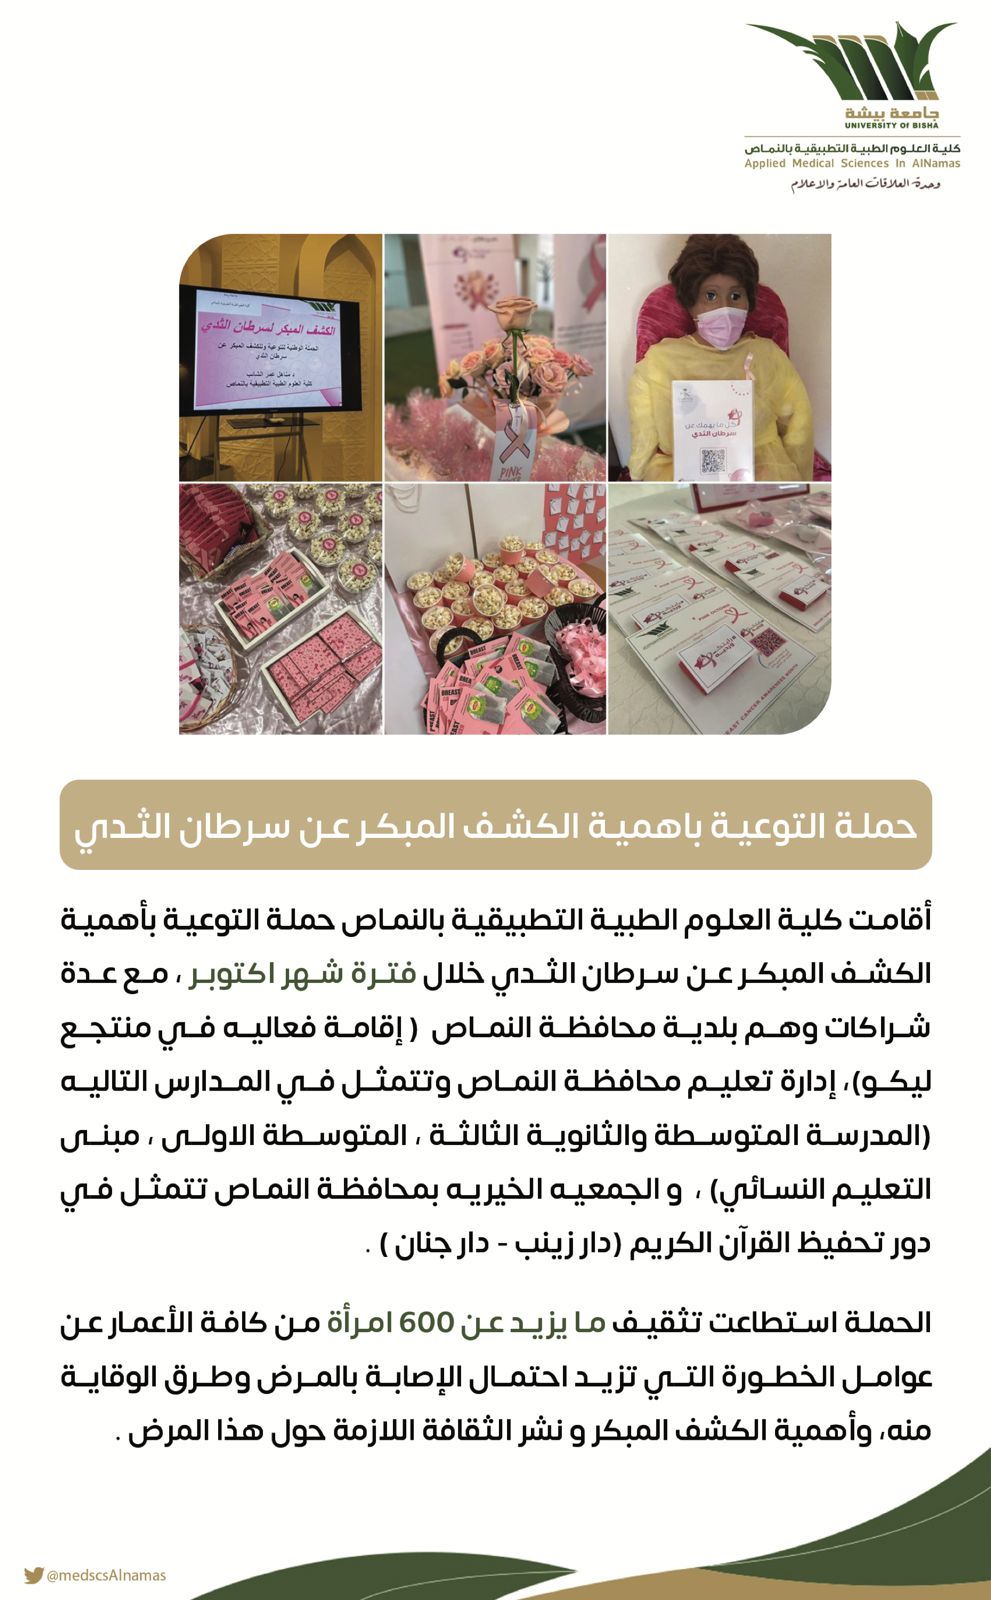 Awareness campaign on the importance of early detection of breast cancer